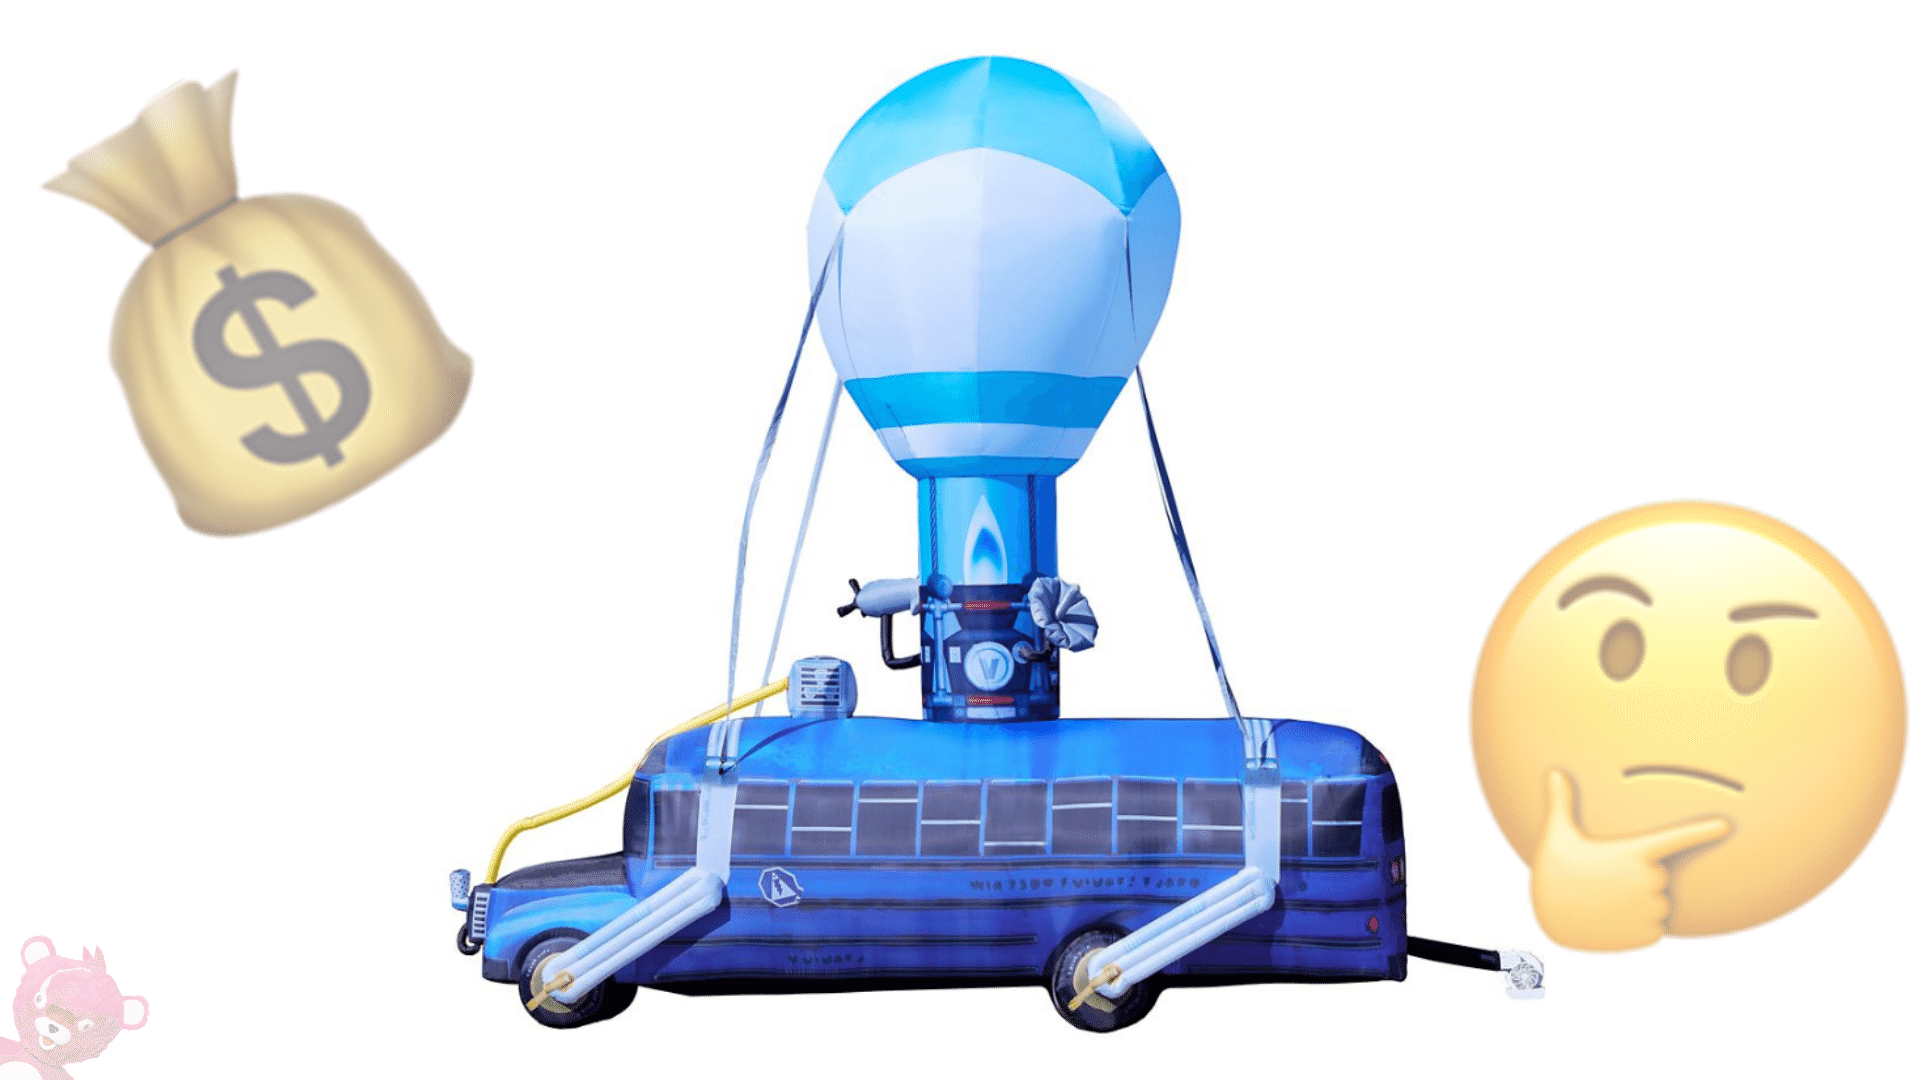 Own Your Own 17.5' Inflatable Fortnite Battle Royale Battle Bus